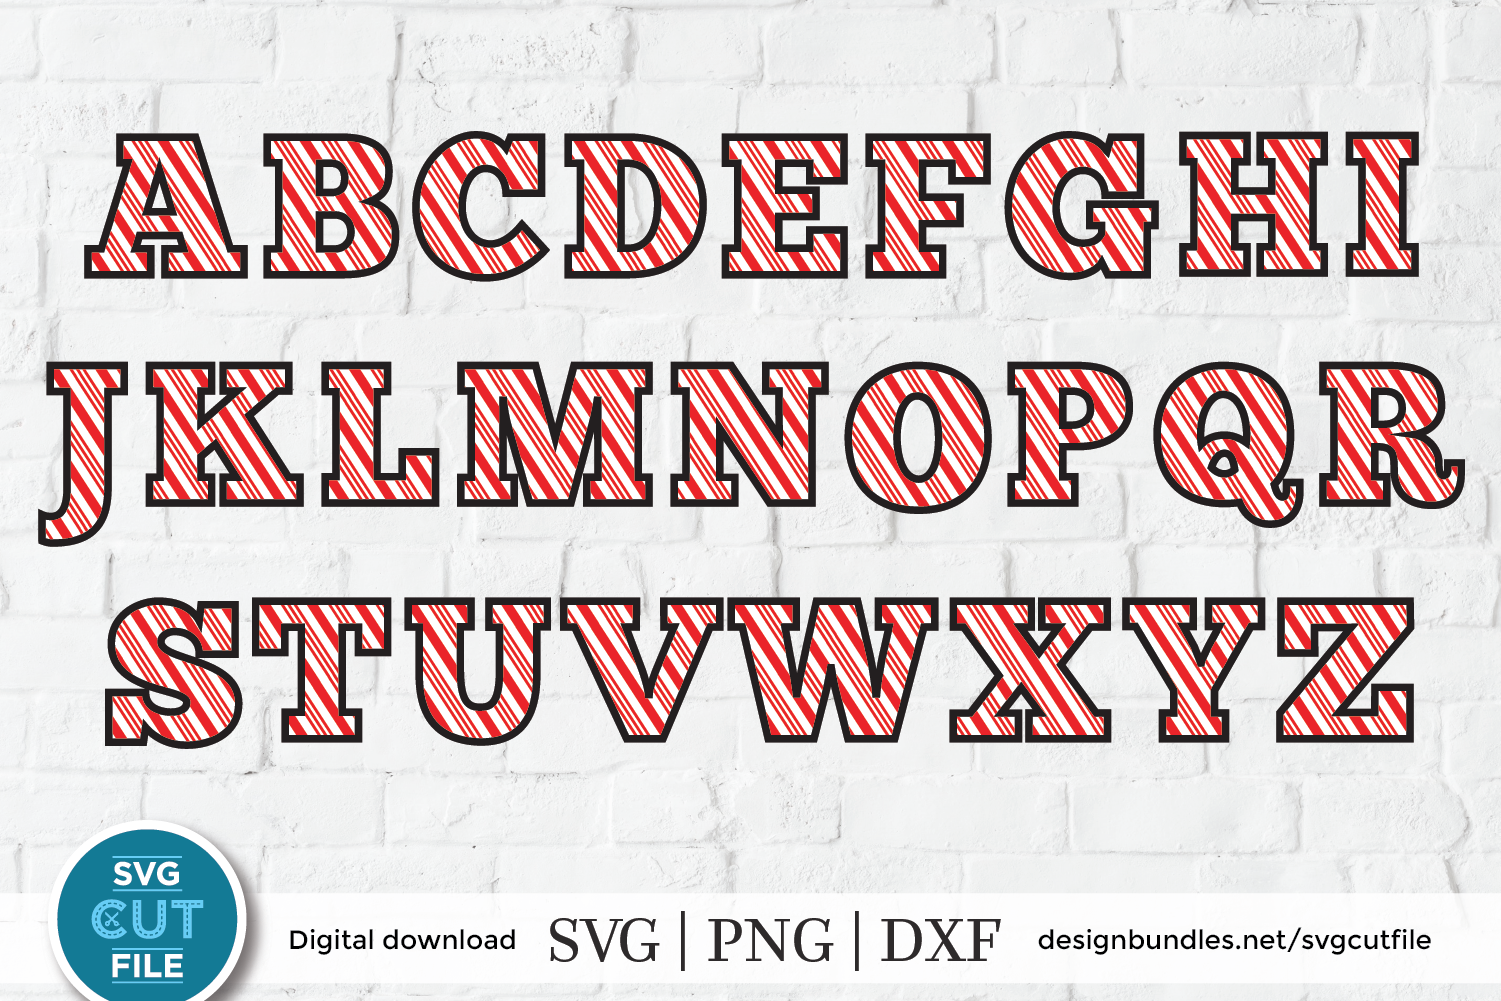 Download Candy Cane letters svg, christmas alphabet svg, dxf png